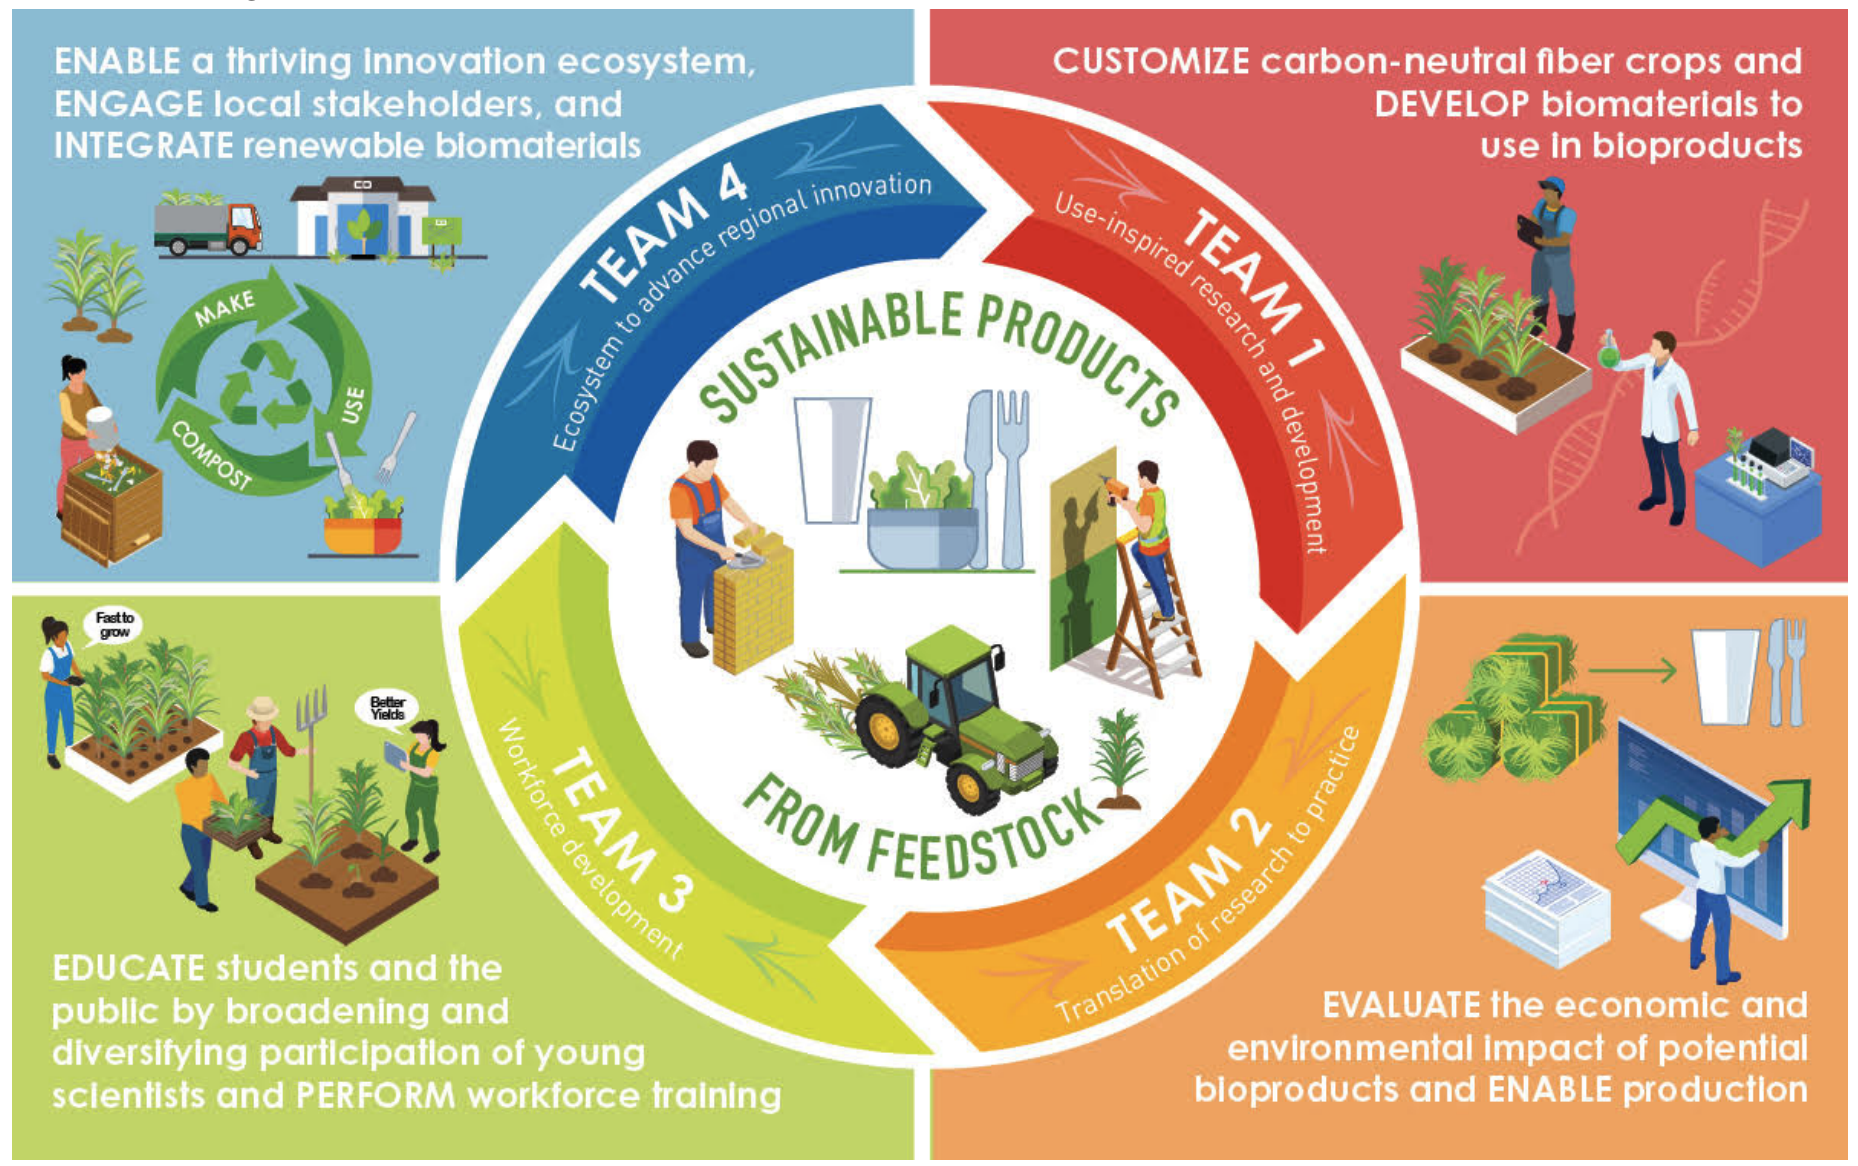 Figure illustrating creation of sustainable products from plant feedstocks for new NSF planning grant